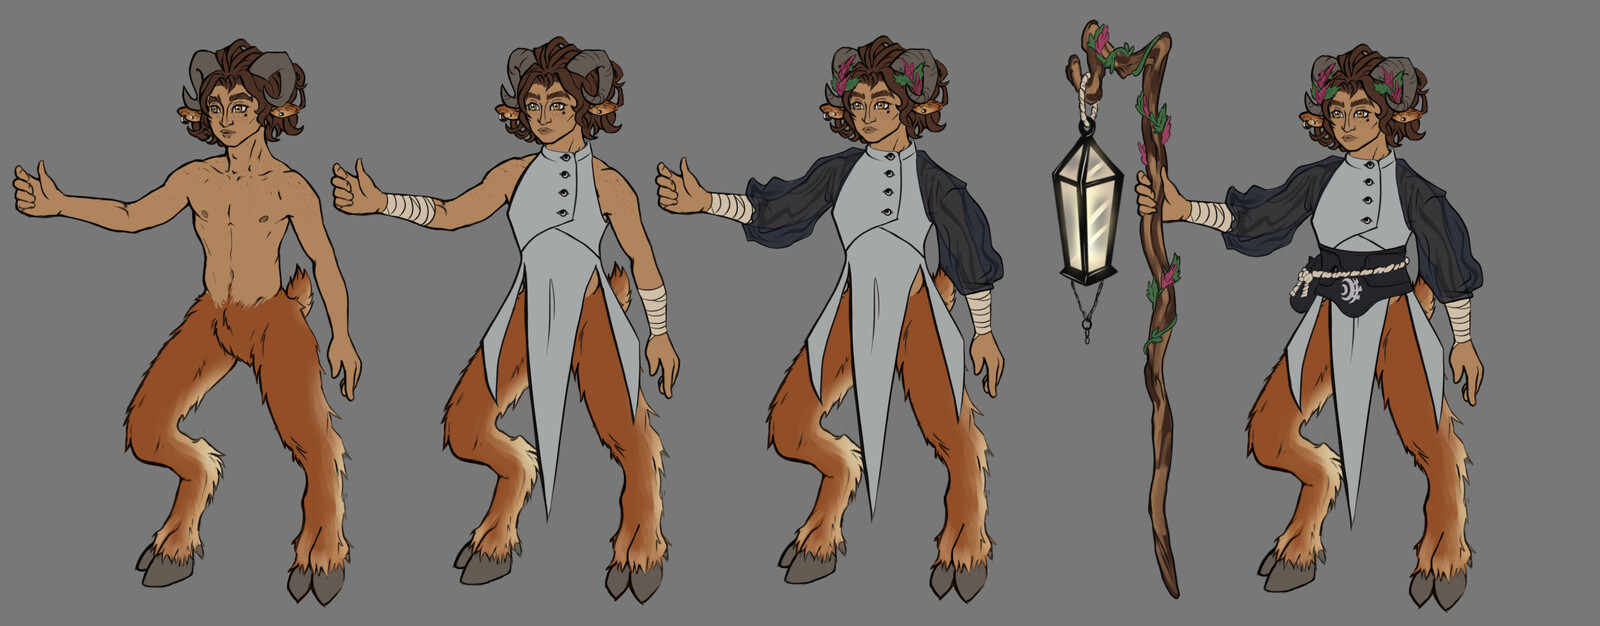 Design sheet for my partner's Dungeons and Dragons character, Ezra.